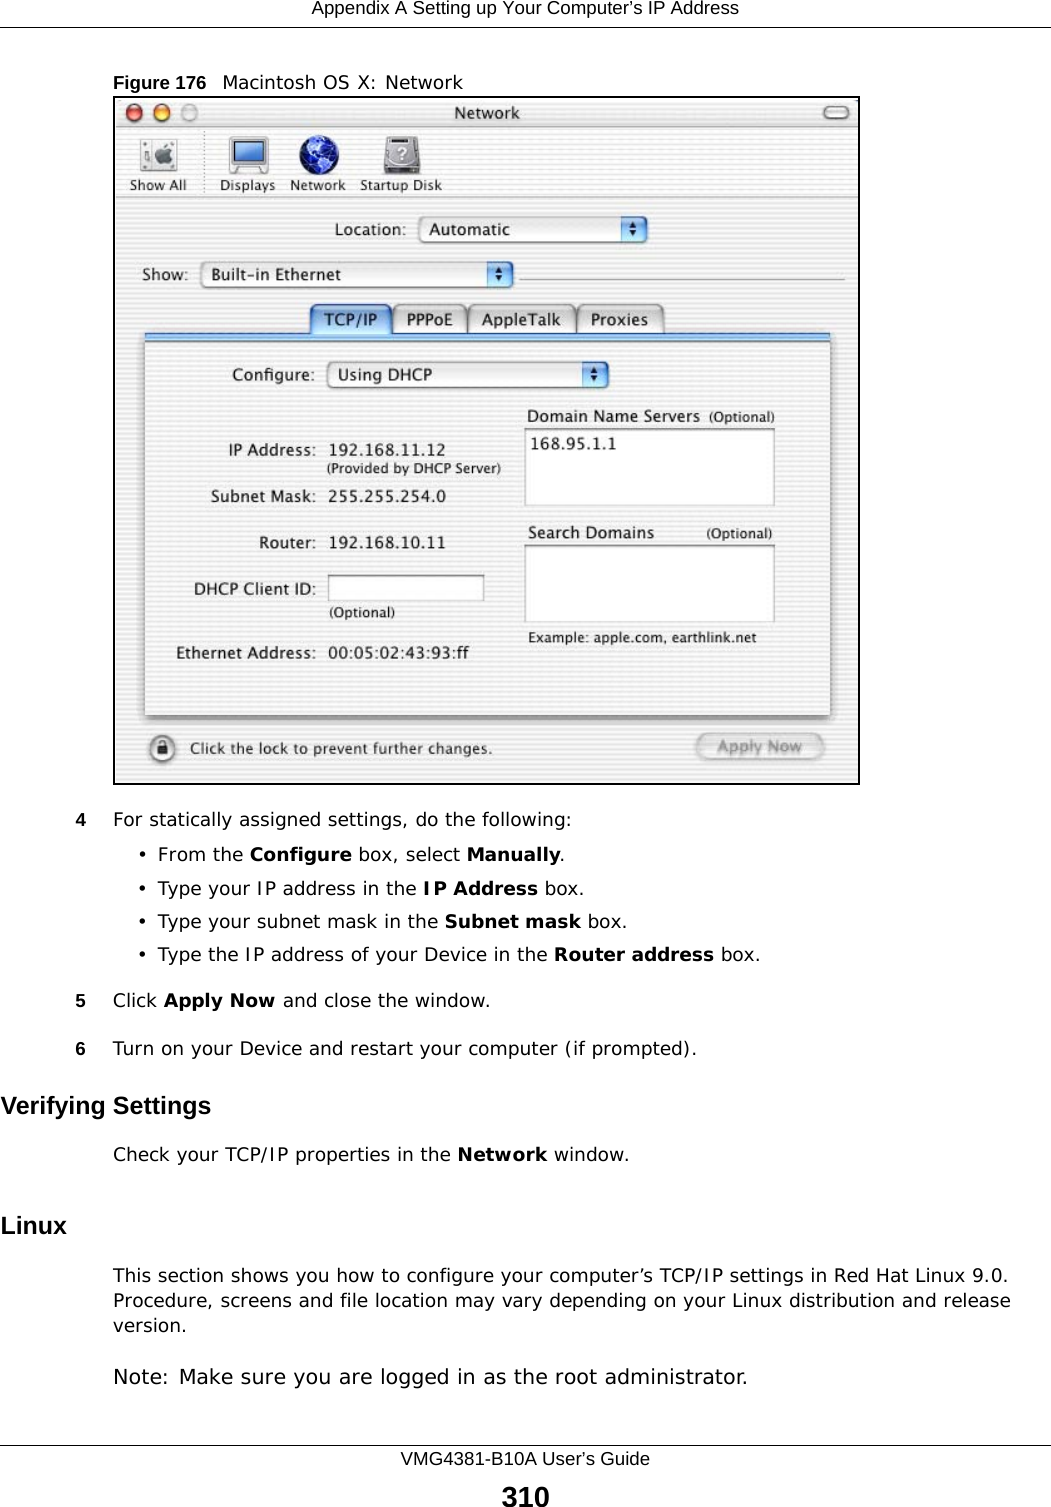 Appendix A Setting up Your Computer’s IP AddressVMG4381-B10A User’s Guide310Figure 176   Macintosh OS X: Network4For statically assigned settings, do the following:•From the Configure box, select Manually.• Type your IP address in the IP Address box.• Type your subnet mask in the Subnet mask box.• Type the IP address of your Device in the Router address box.5Click Apply Now and close the window.6Turn on your Device and restart your computer (if prompted).Verifying SettingsCheck your TCP/IP properties in the Network window.Linux This section shows you how to configure your computer’s TCP/IP settings in Red Hat Linux 9.0. Procedure, screens and file location may vary depending on your Linux distribution and release version. Note: Make sure you are logged in as the root administrator. 